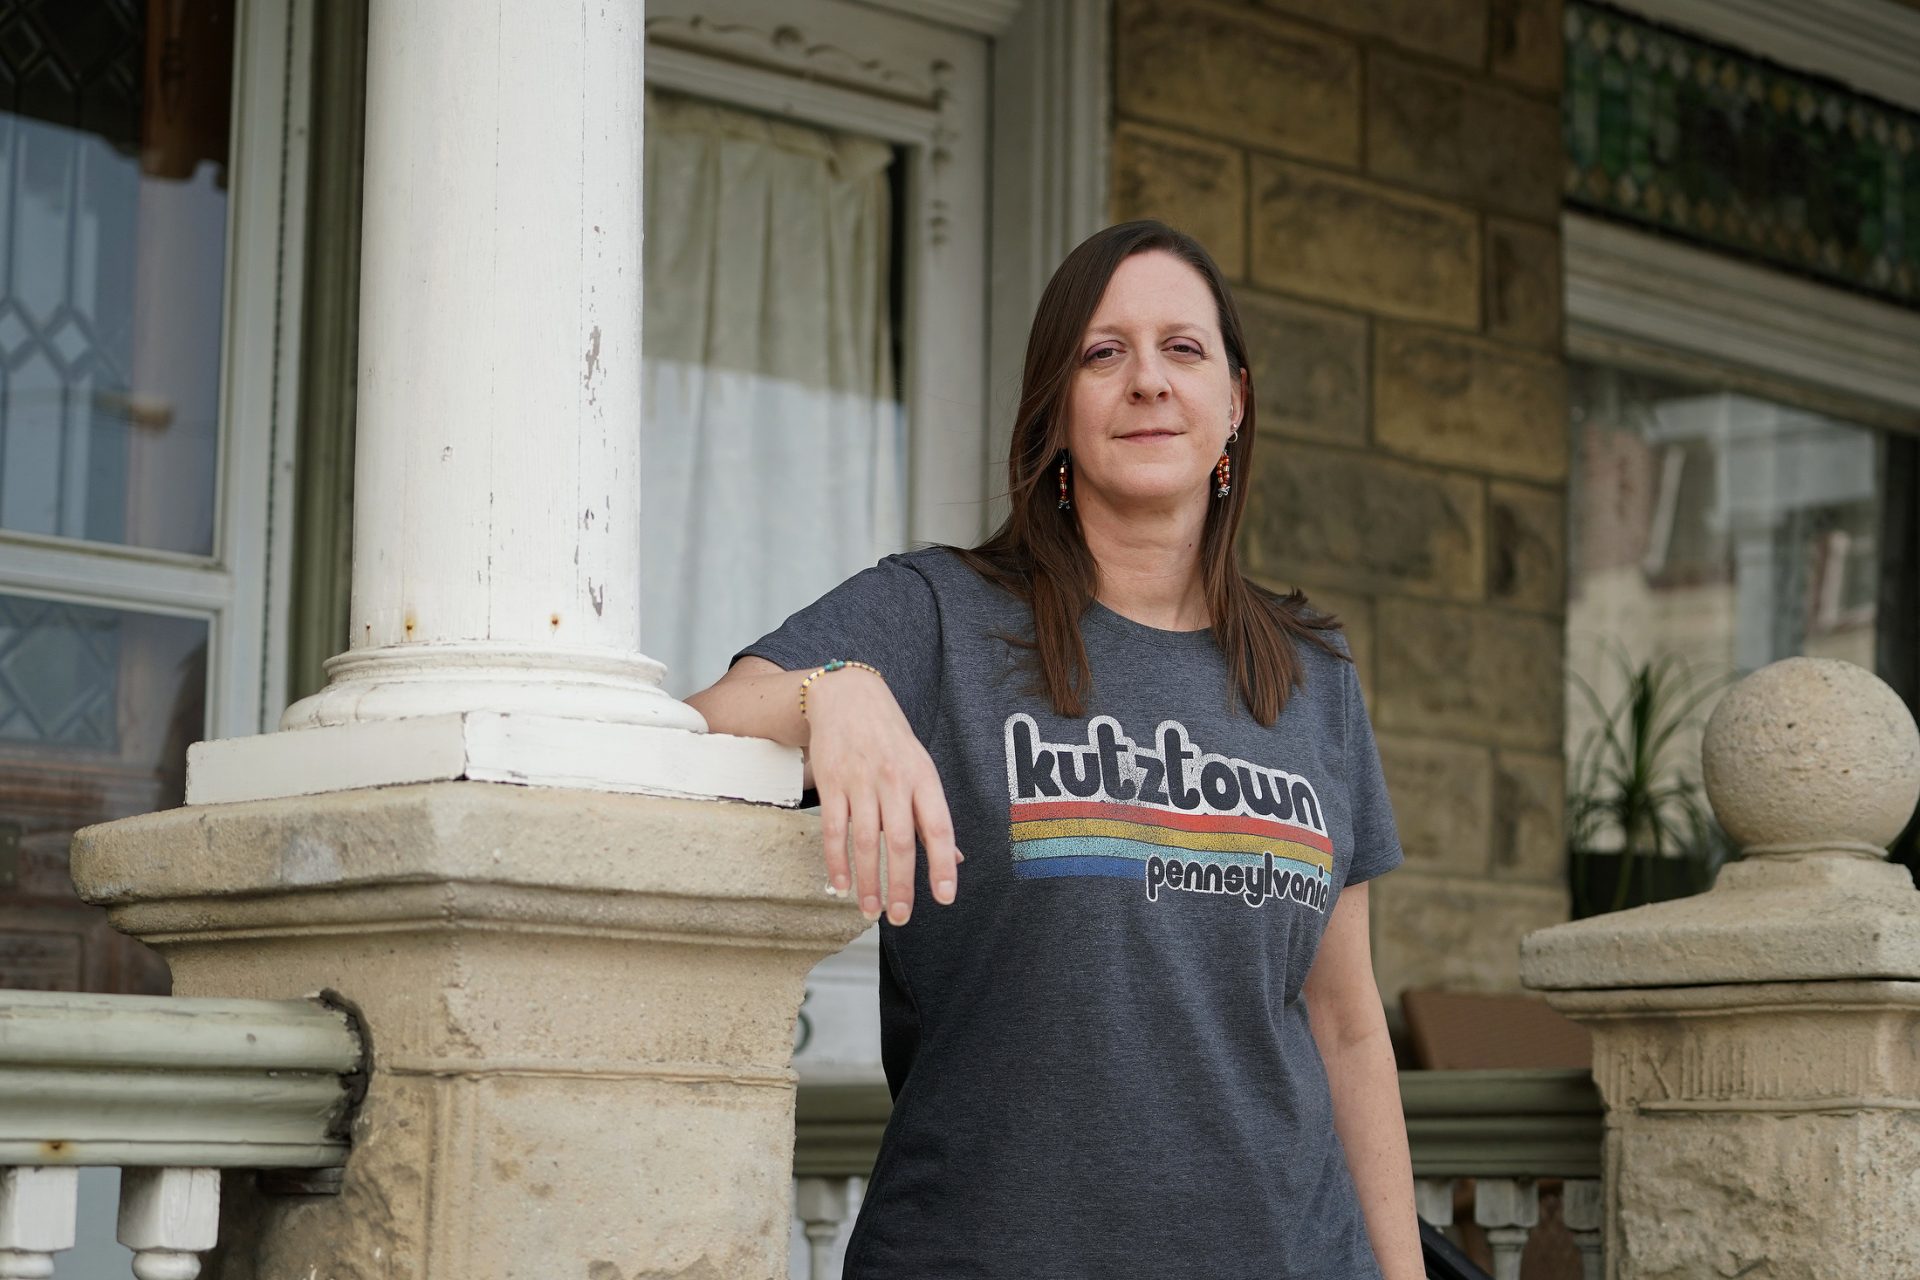 Denise Bosler, department chair of Communication Design at Kutztown University, is photographed at her home just blocks away from the campus in Kutztown, Pennsylvania